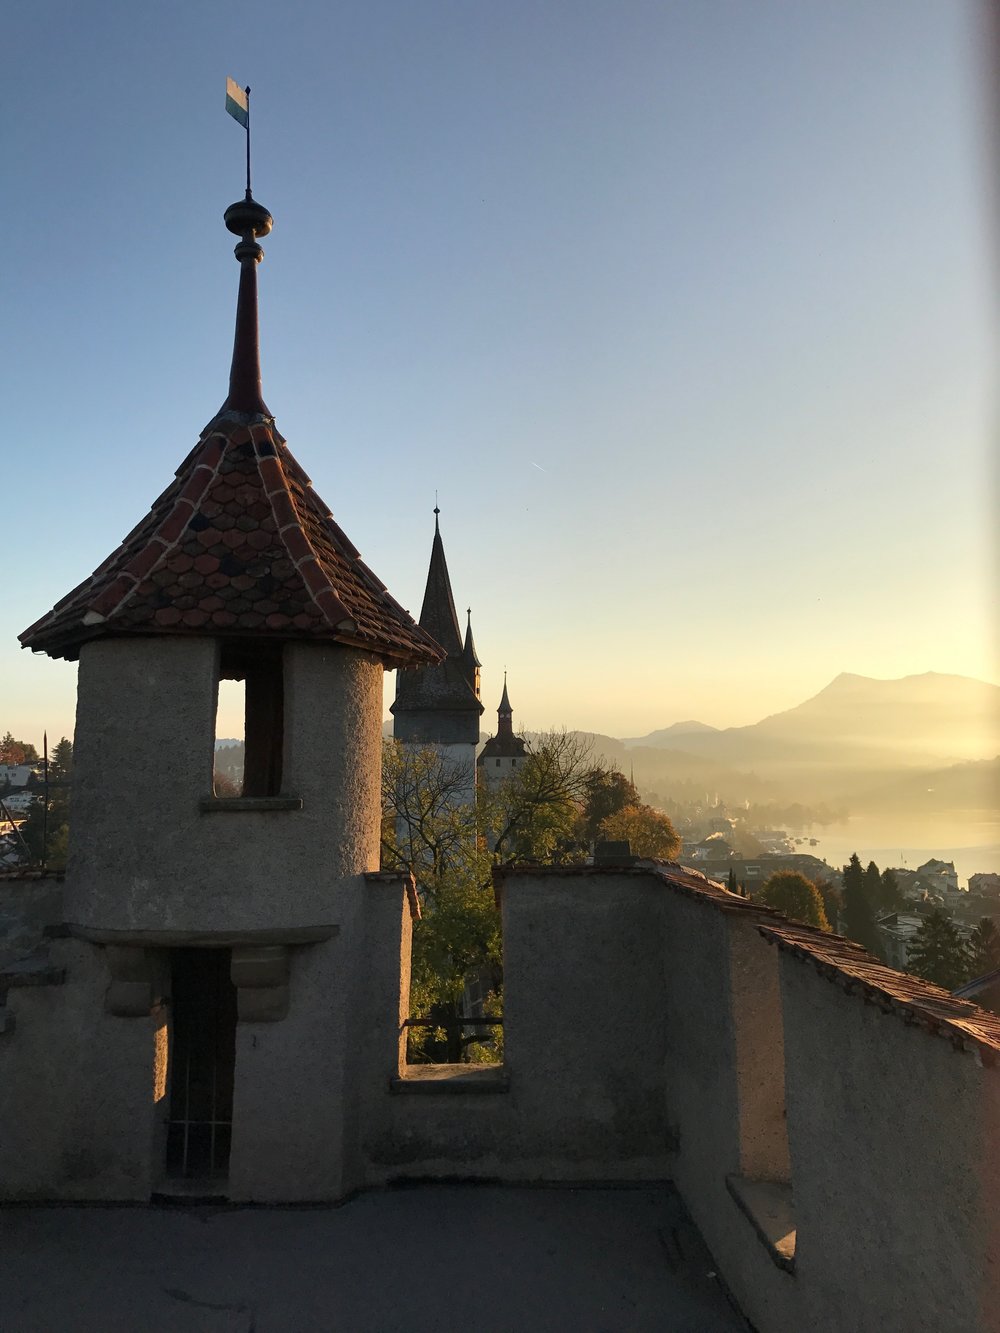 Morning views from the castle